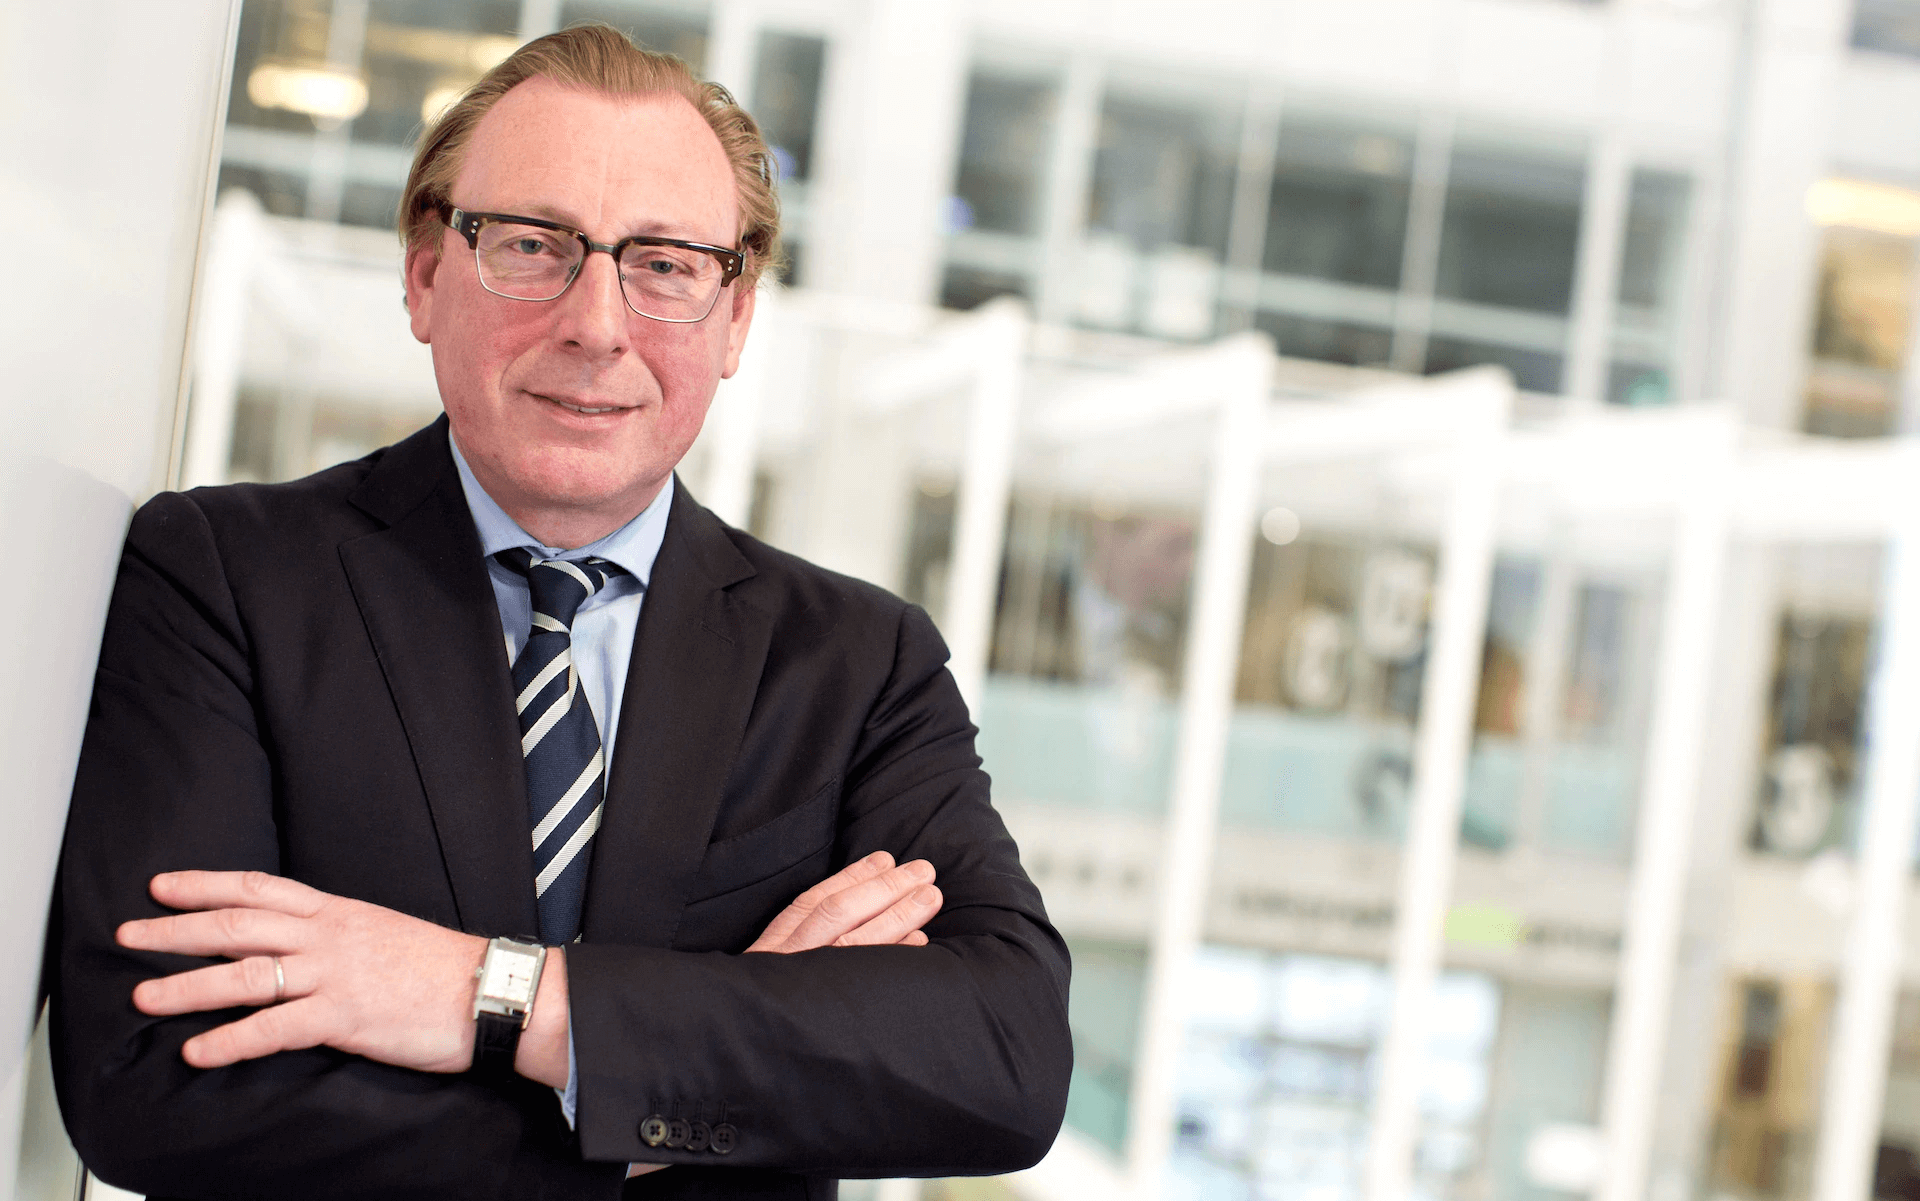 Benny Higgins, Executive Chairman of Forster Chase Corporate Finance, has been appointed by the Scottish govt on an advisory group for economic recovery